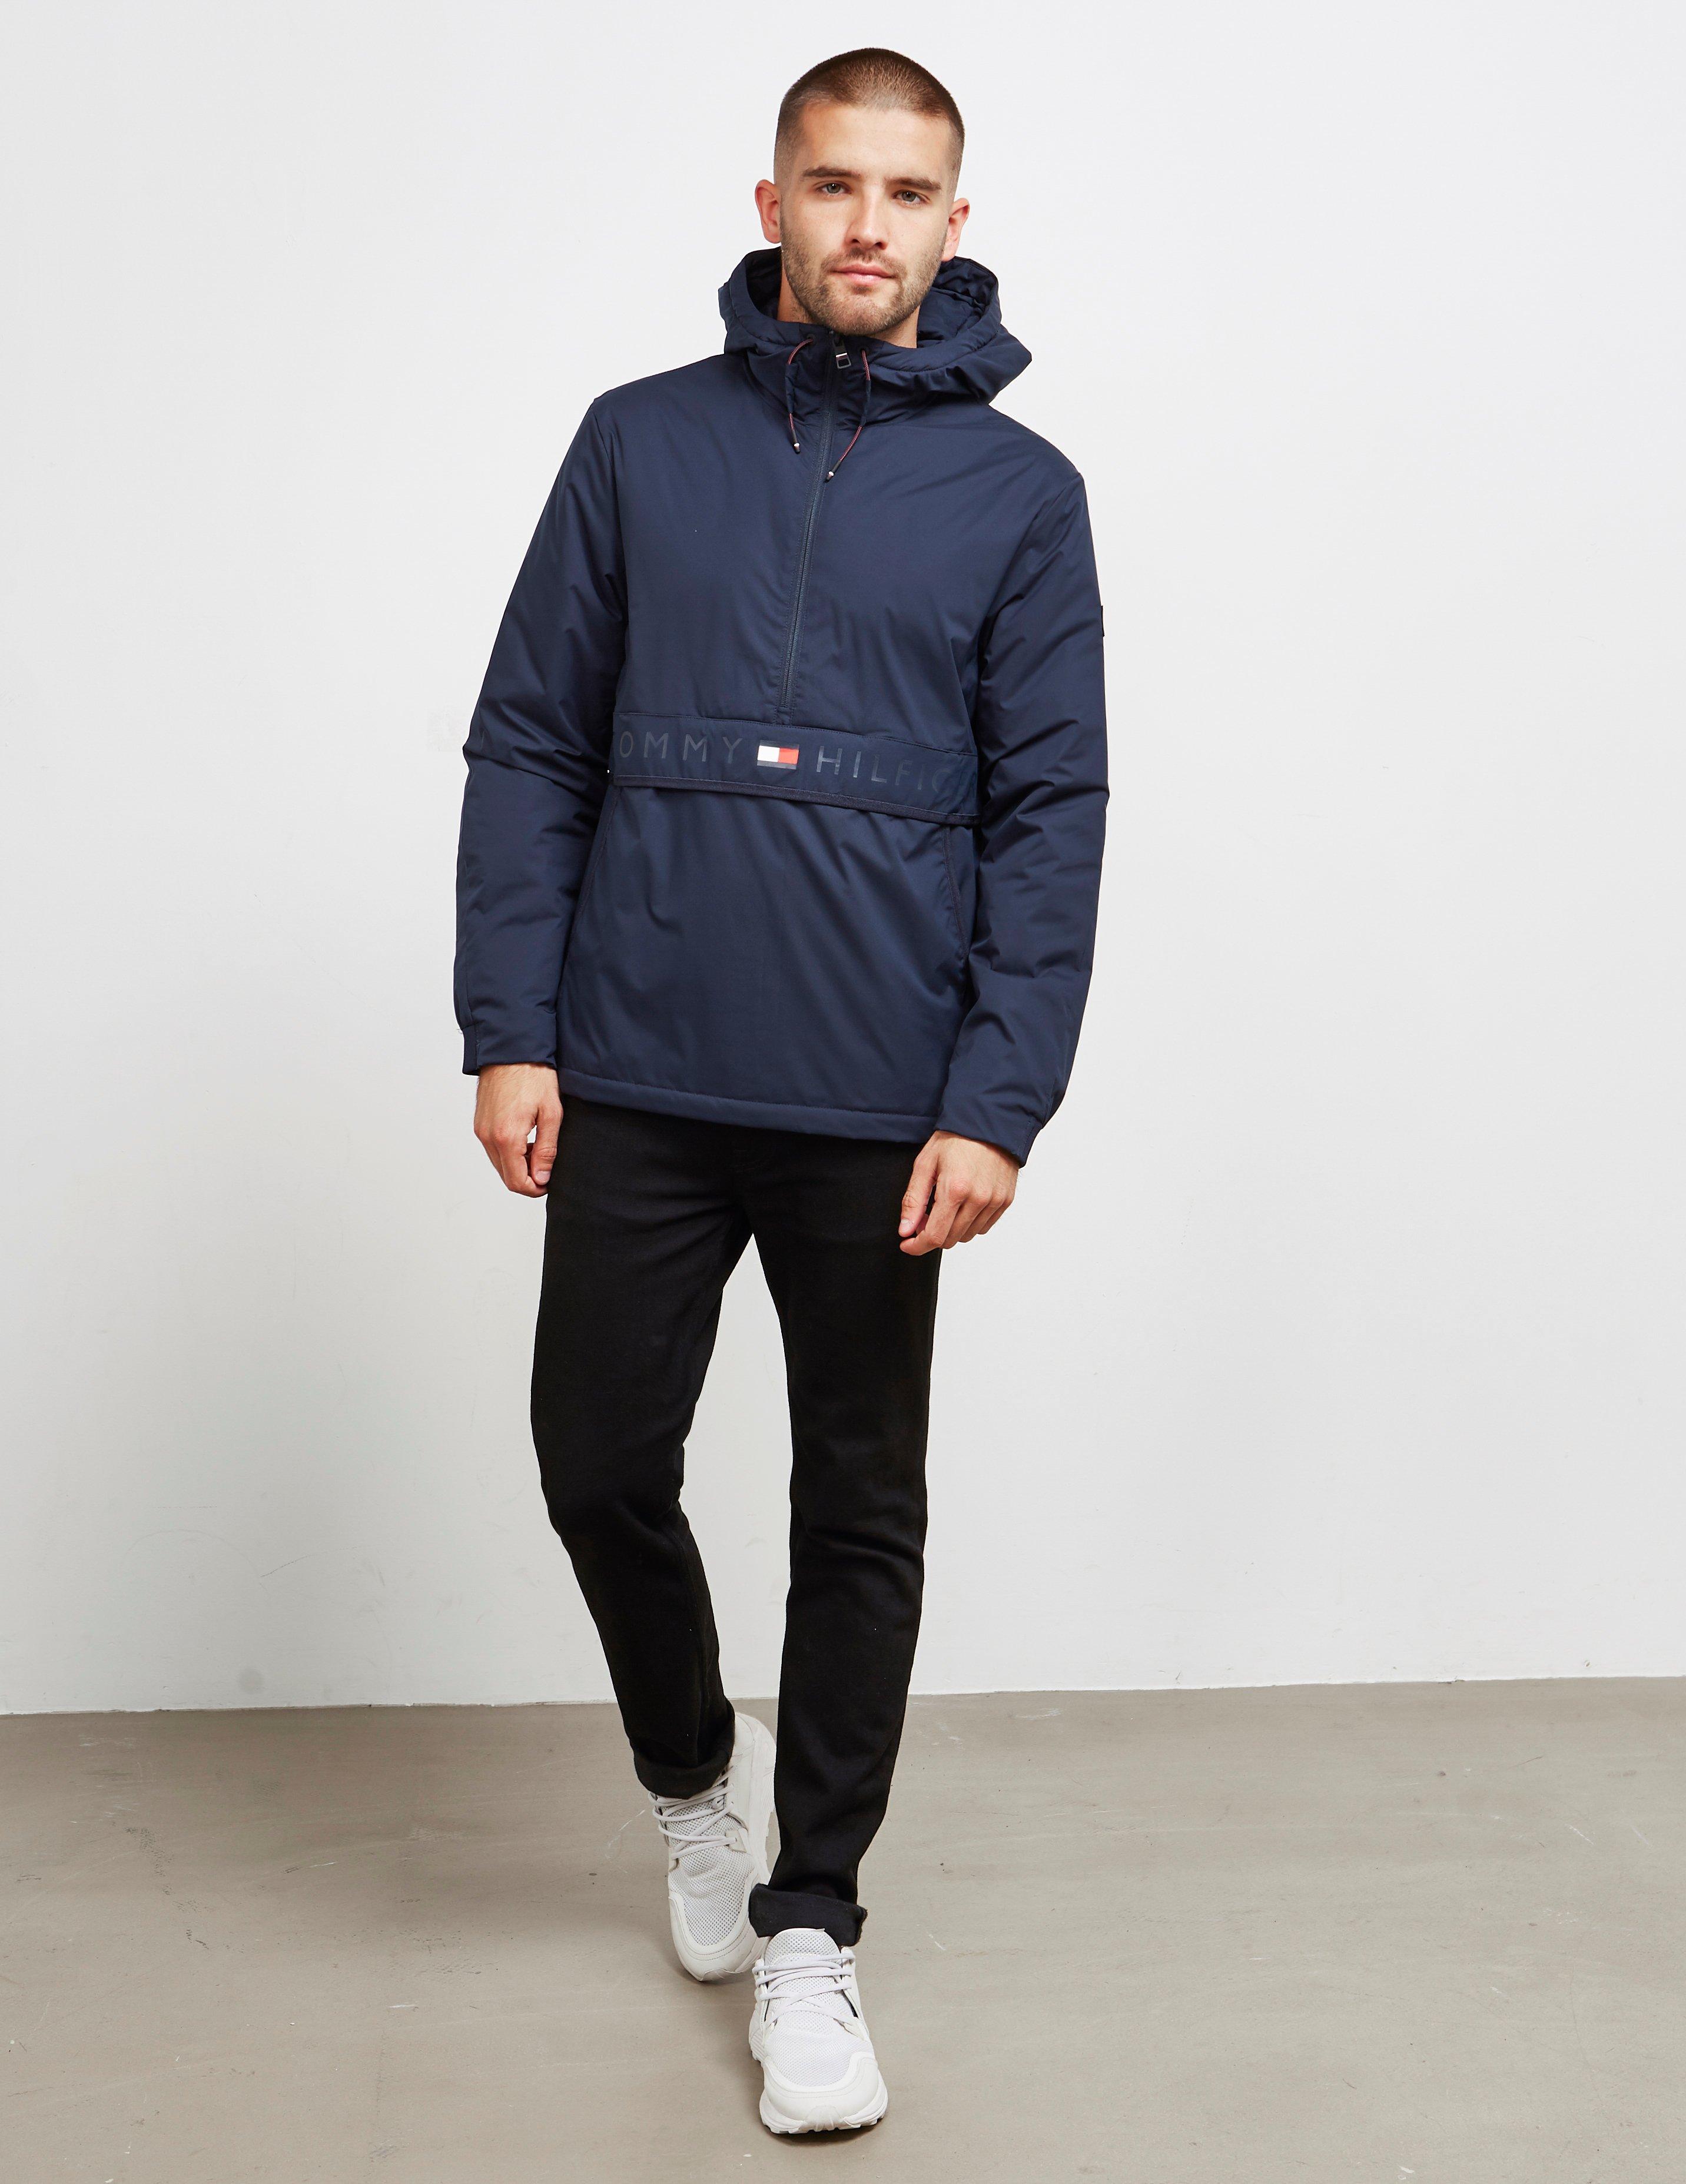 Tommy Hilfiger Synthetic Stretch Anorak Jacket Navy Blue for Men - Lyst